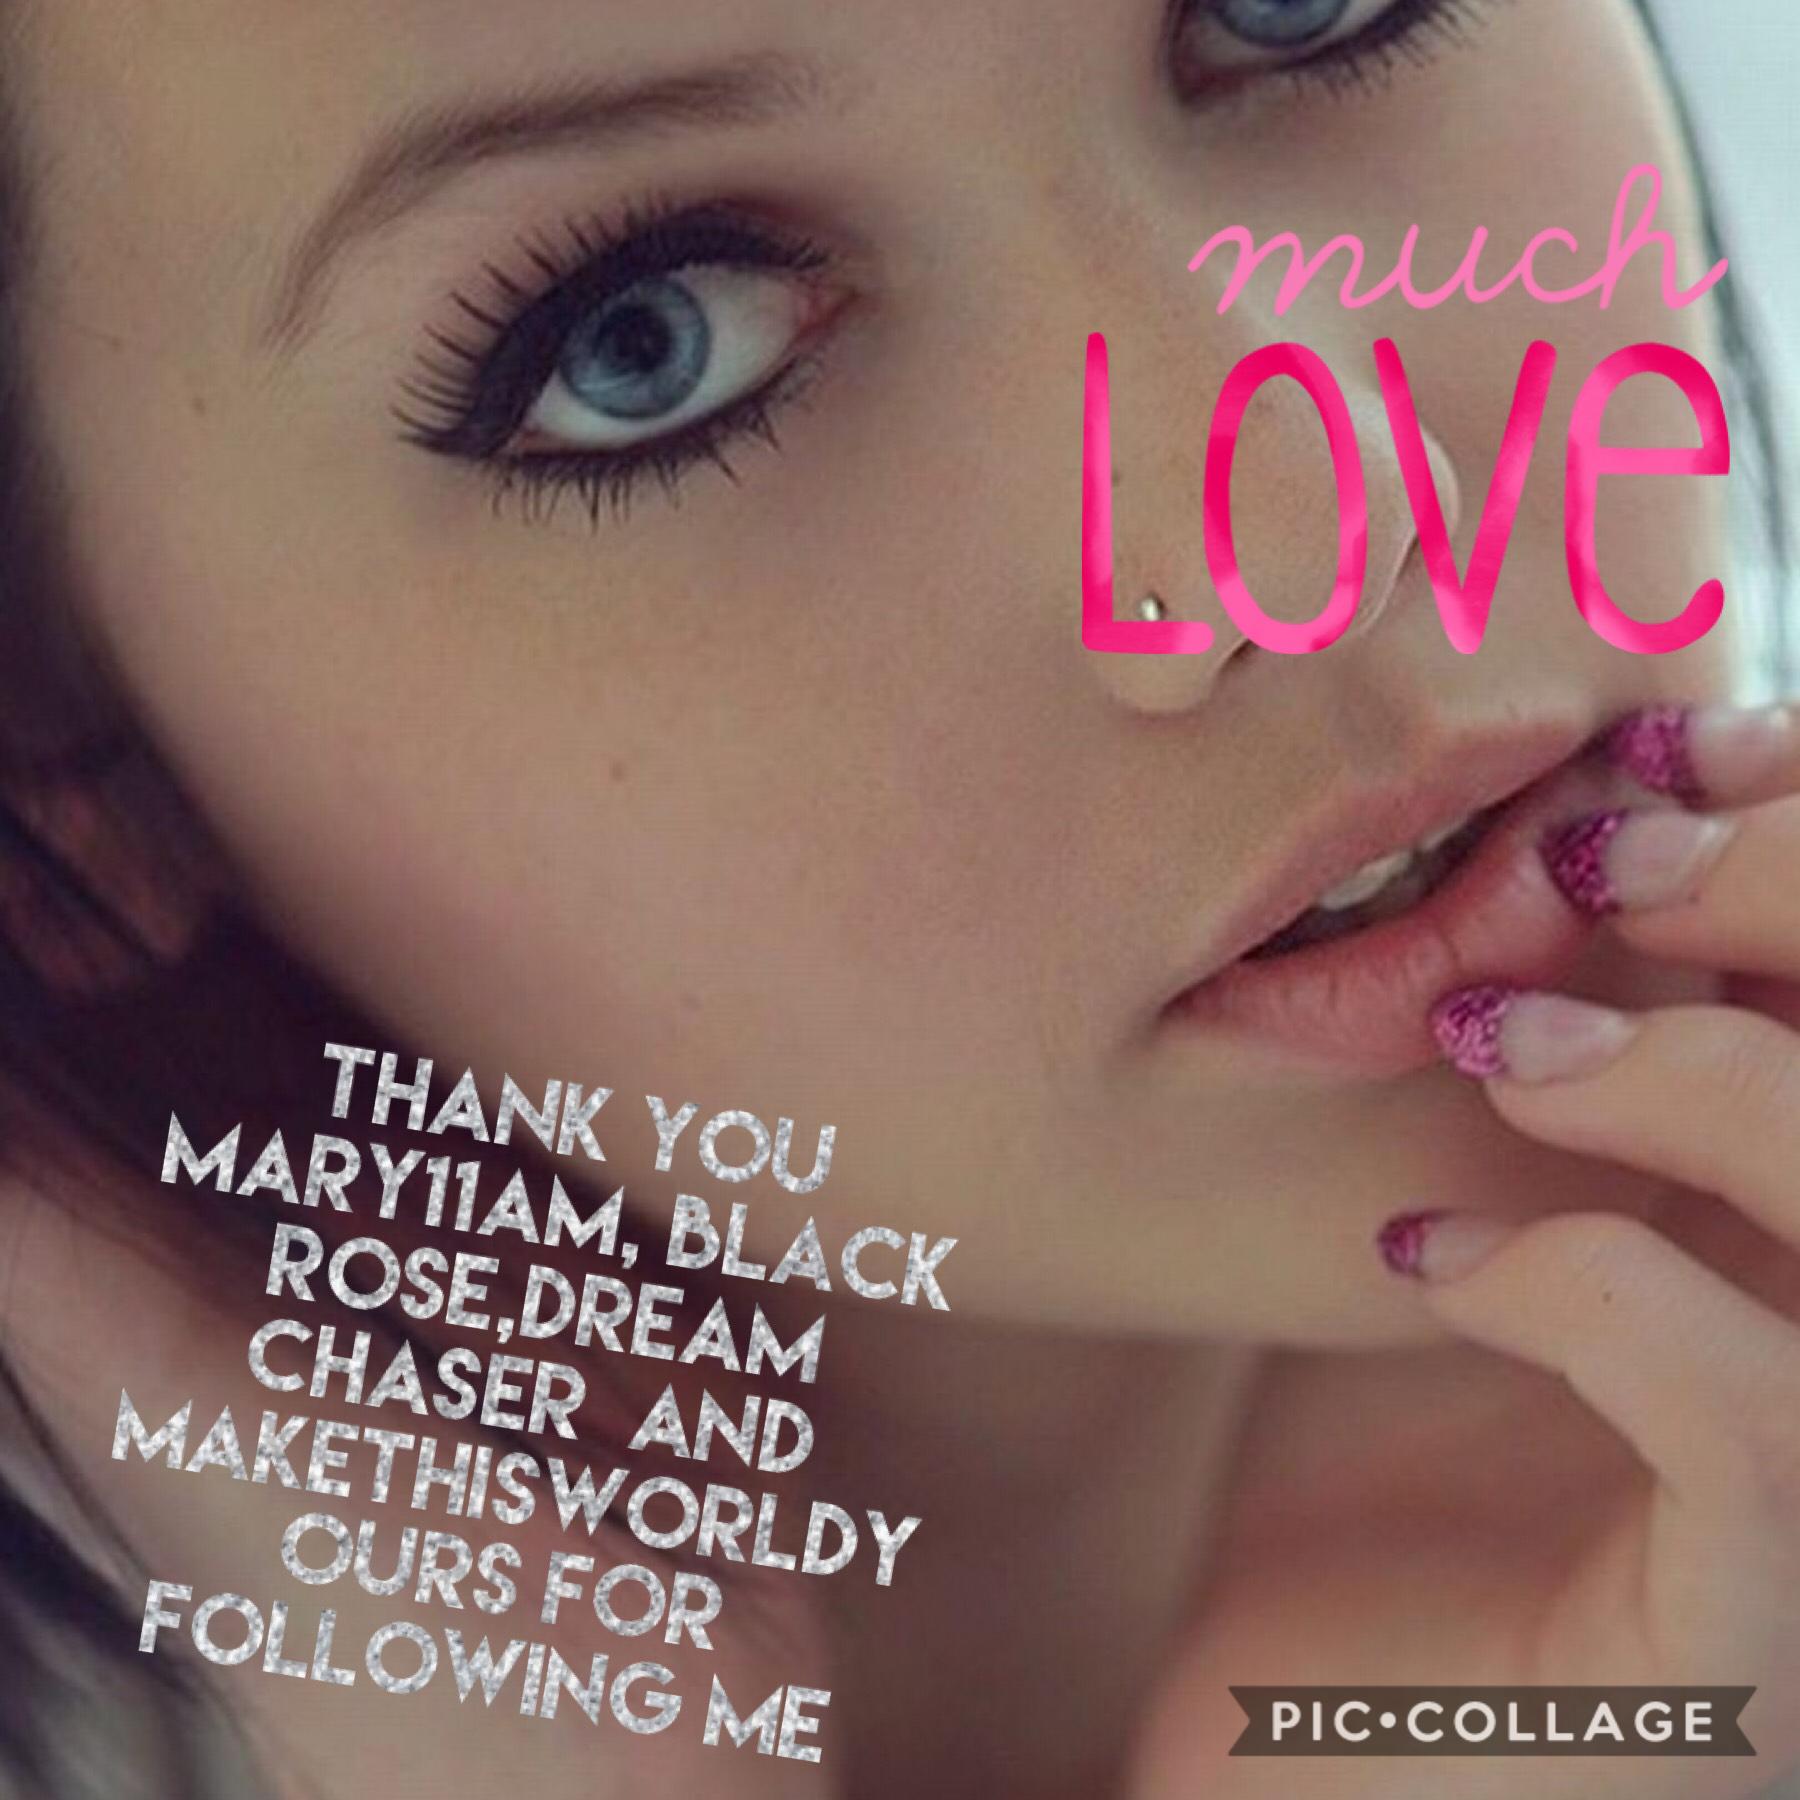 Thank you for following me and if you follow me I’ll do the exact same thing for you on the people that follow me are all on this collage